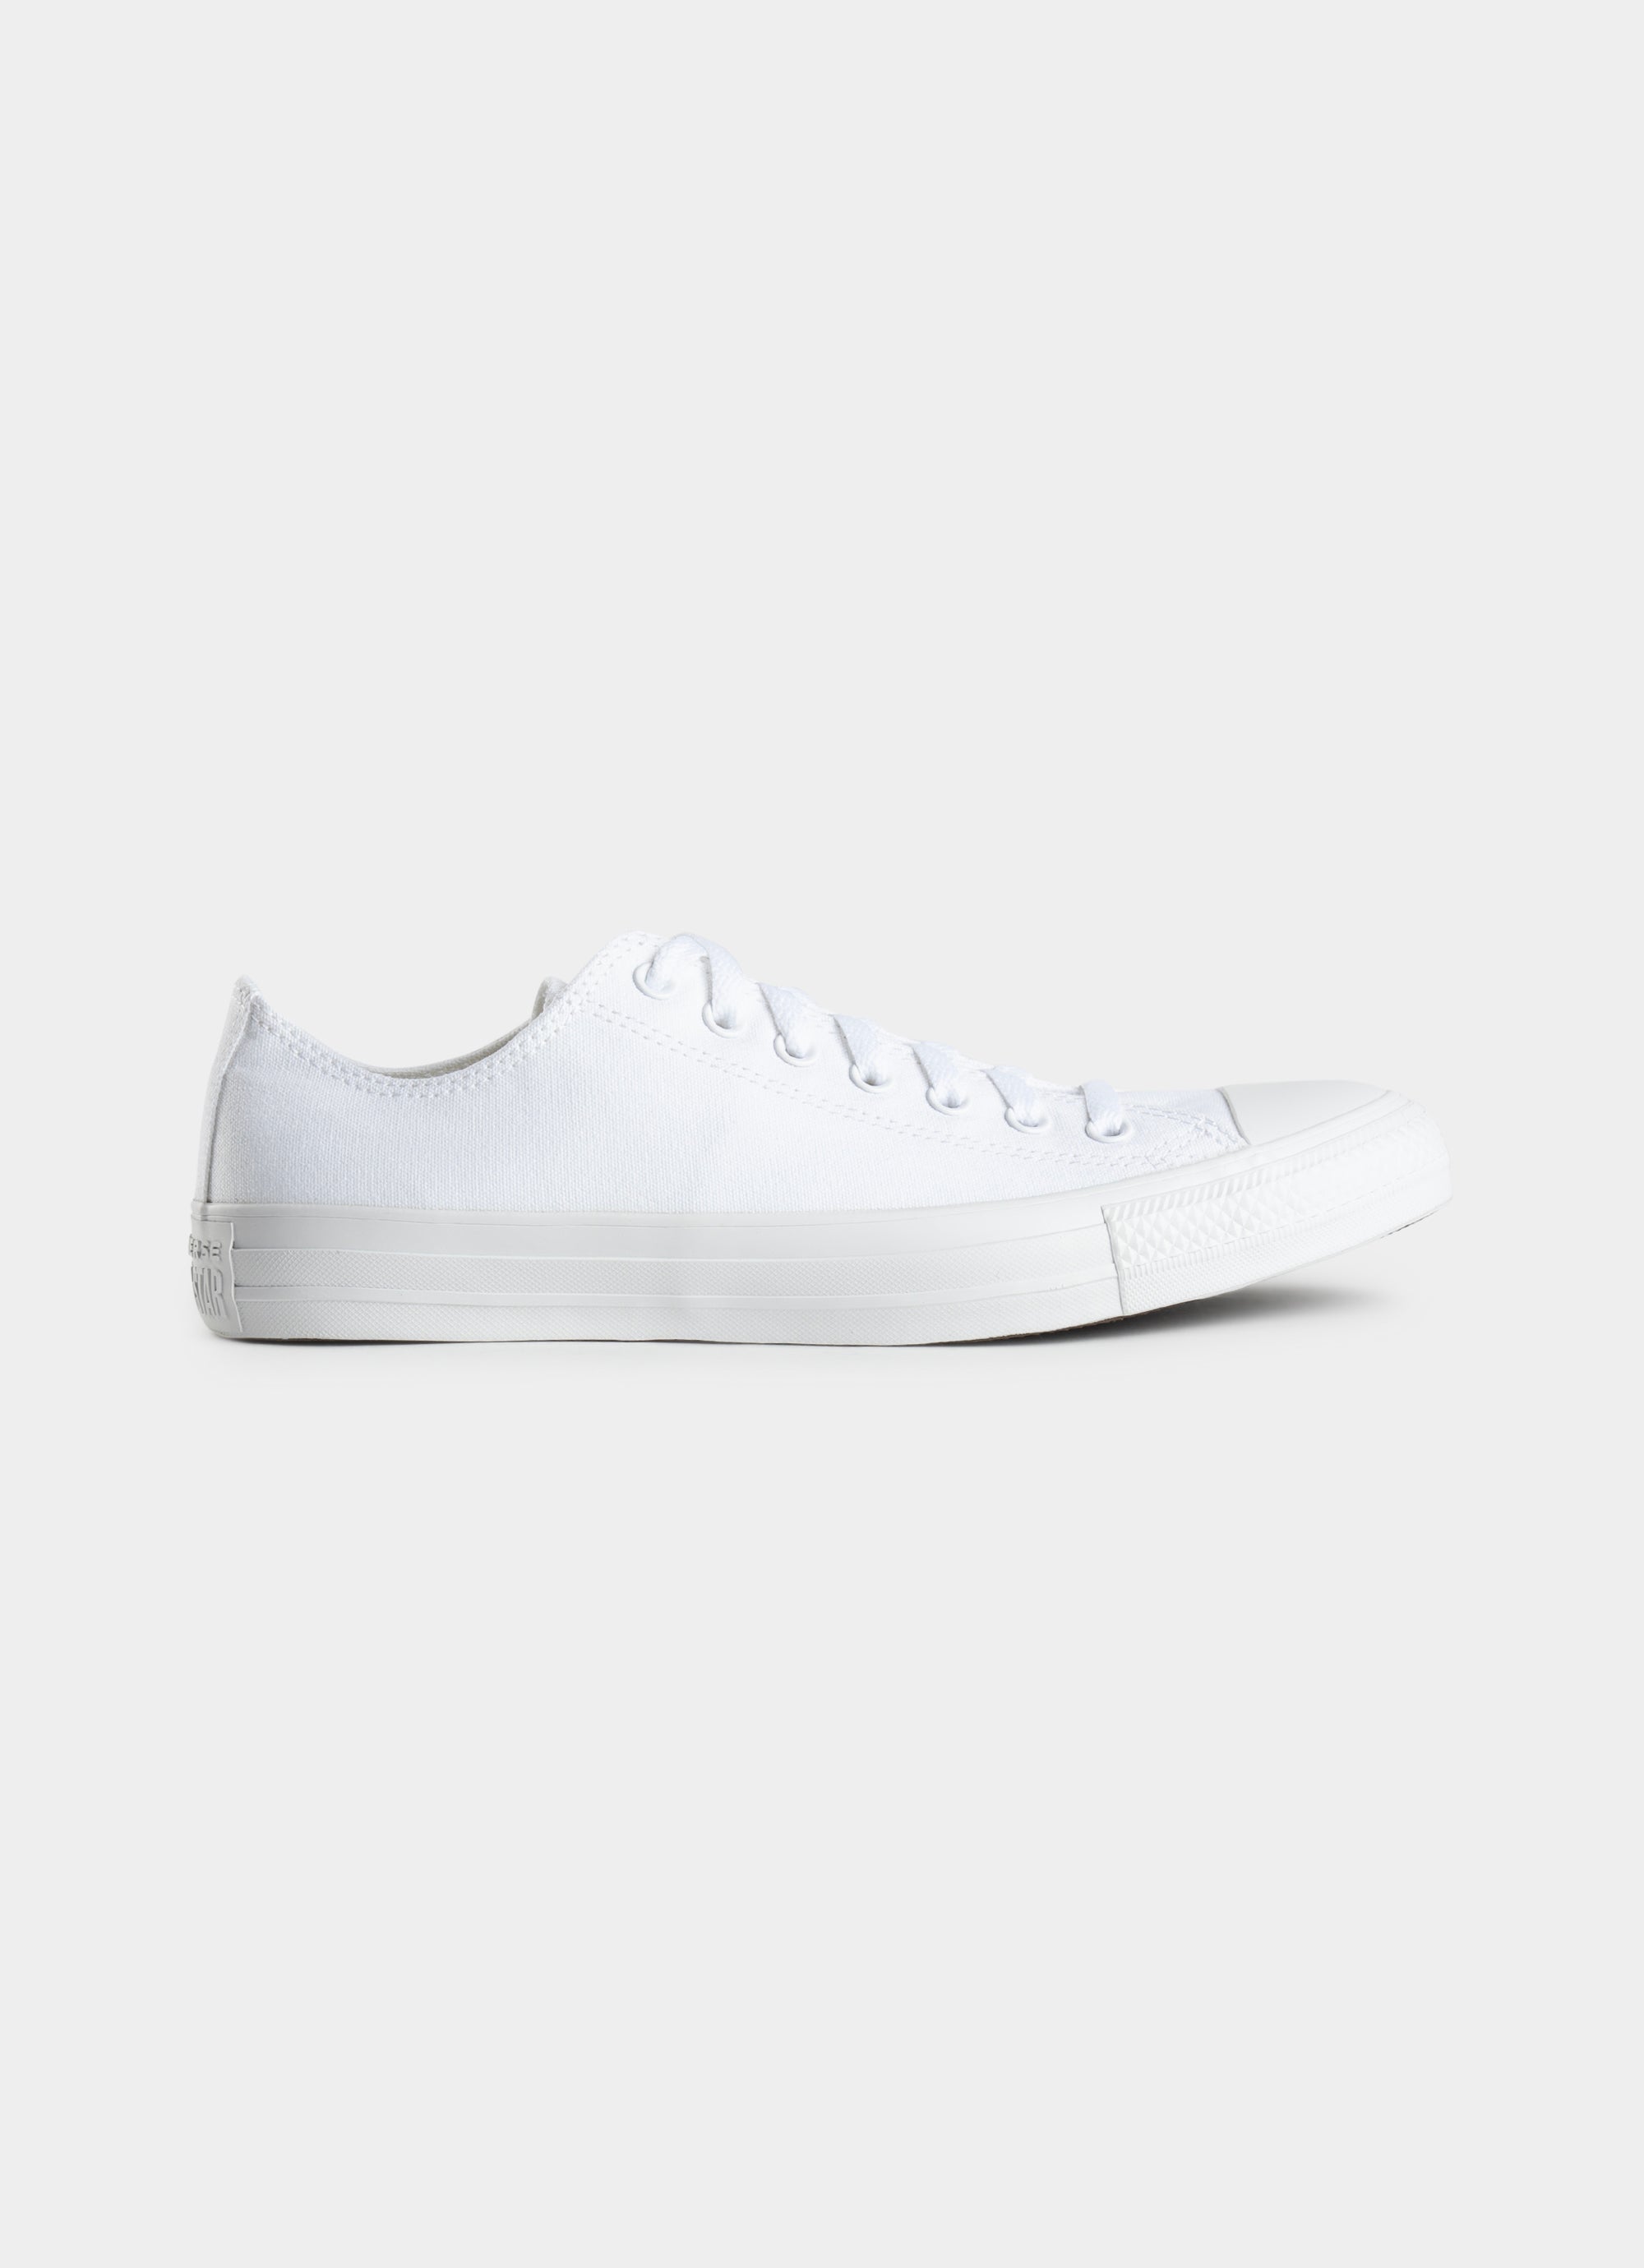 Converse Chuck All Star Low Shoe in White | Red Rat